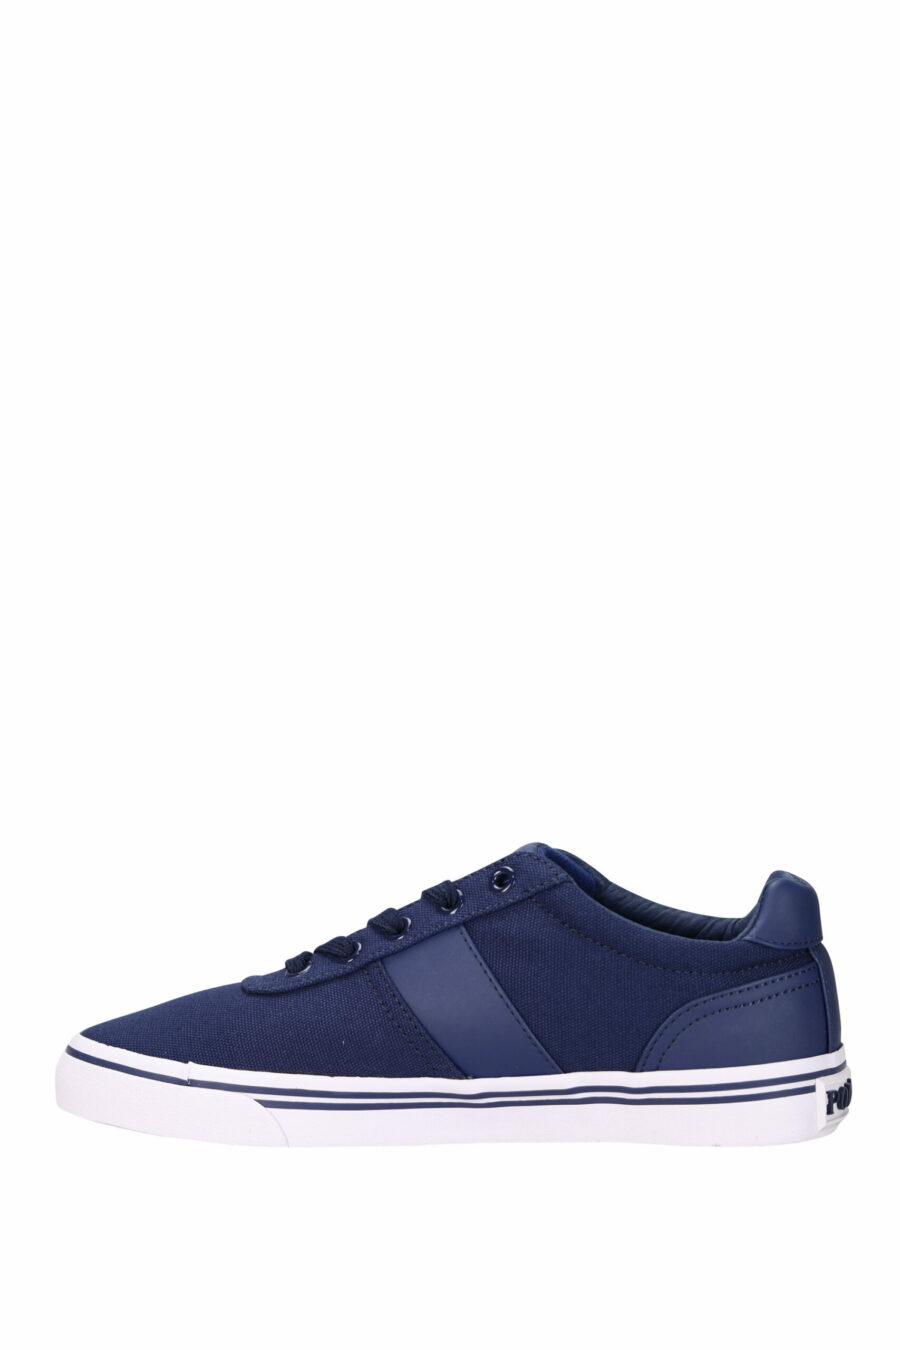 Dark blue trainers with mini-logo "polo" and white sole - 3611588439341 2 scaled